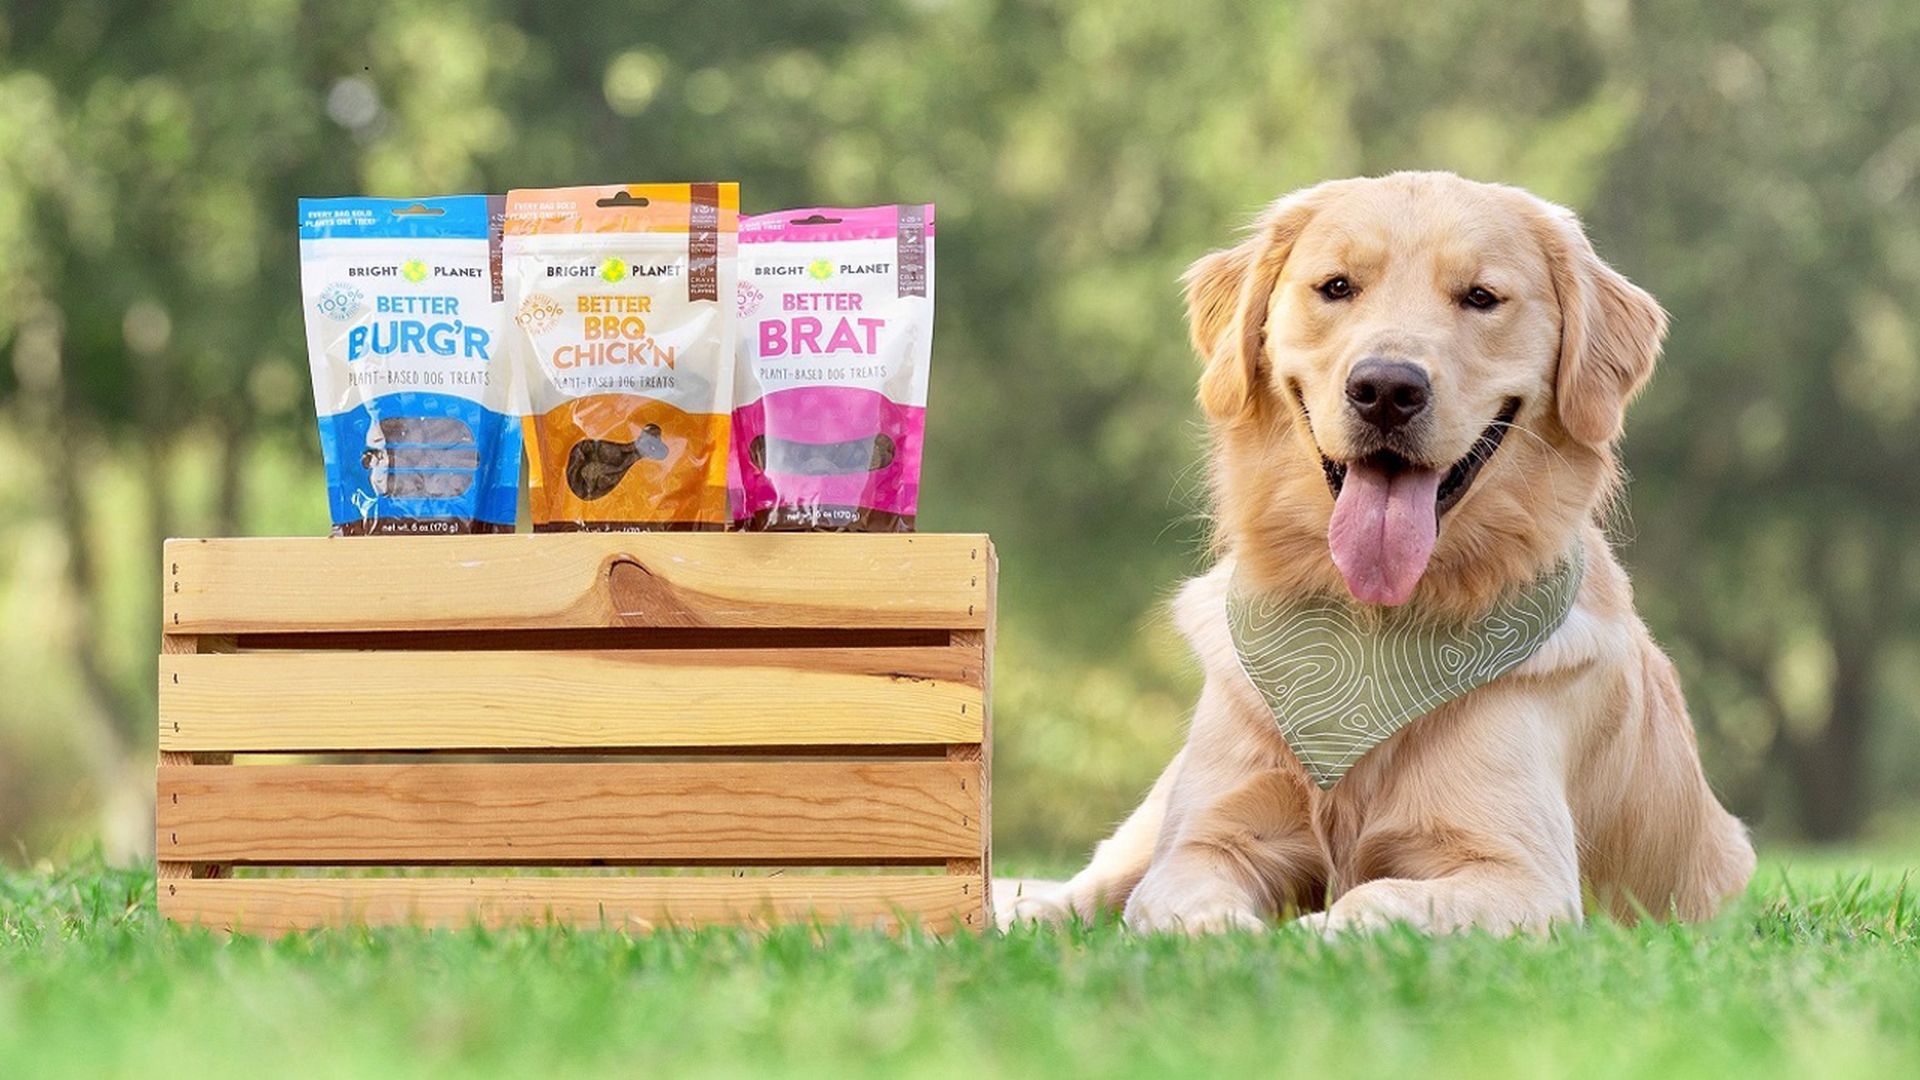 A cute dog sitting next to packages of vegan dog treats.